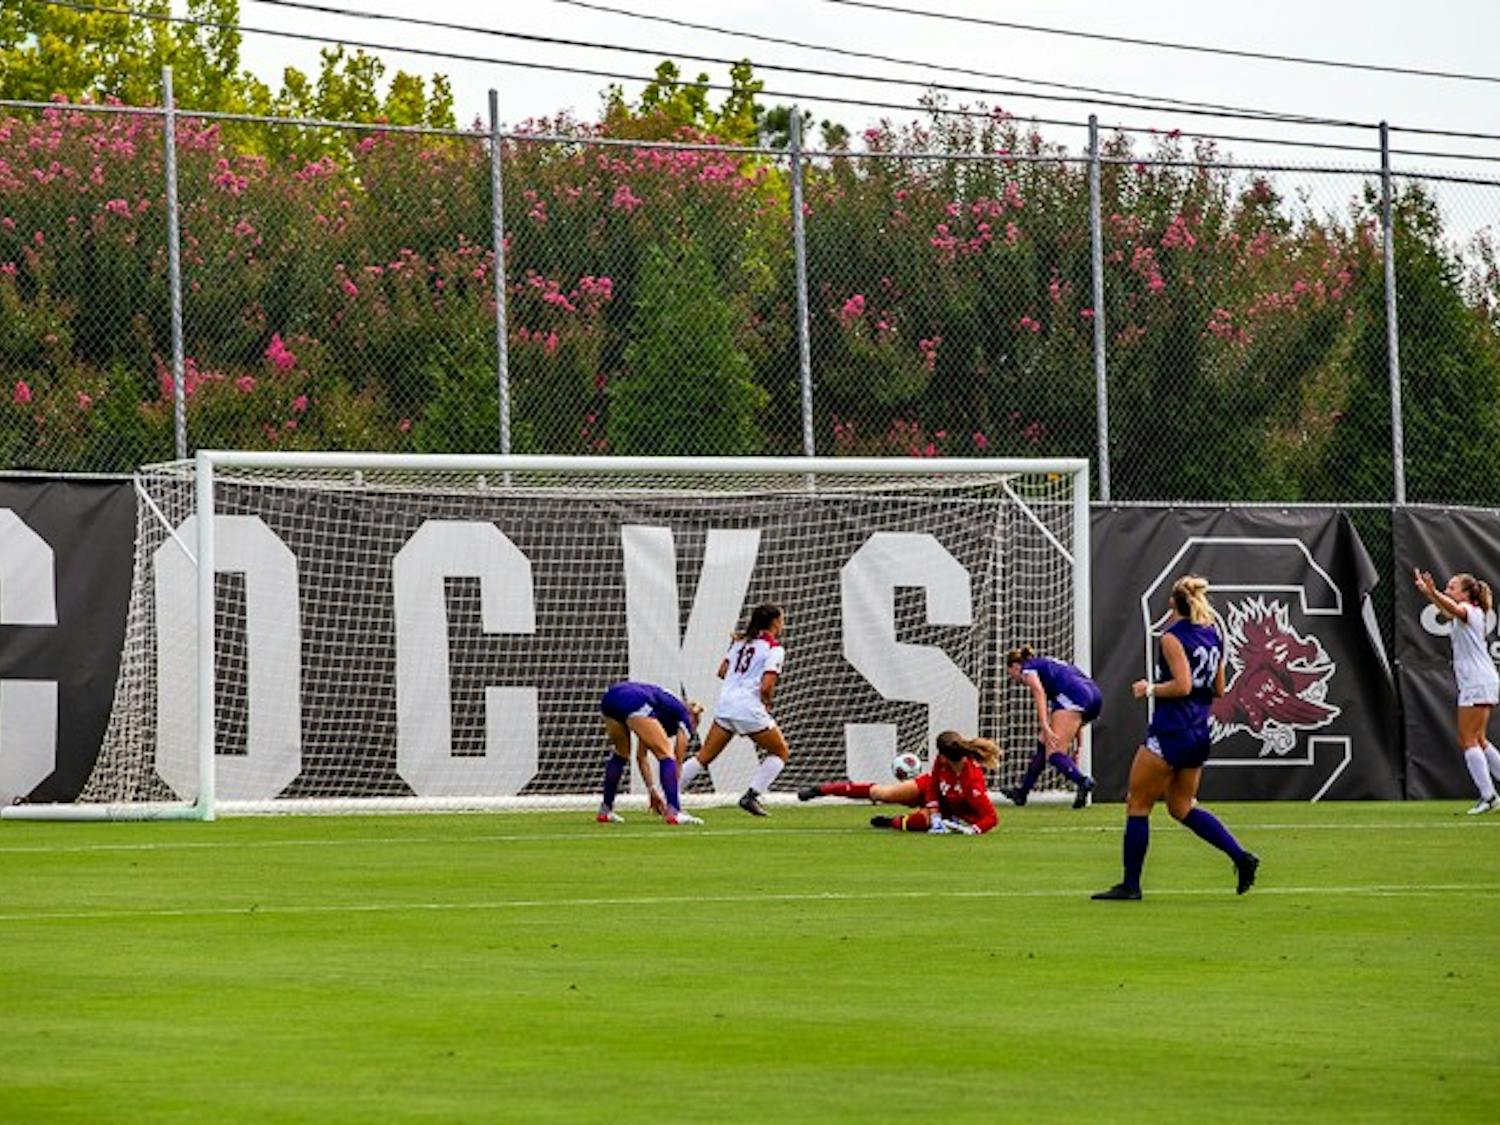 The No. 12 South Carolina women's soccer team earned its first victory of the season on Sunday afternoon, defeating East Carolina 2-0 at Stone Stadium.